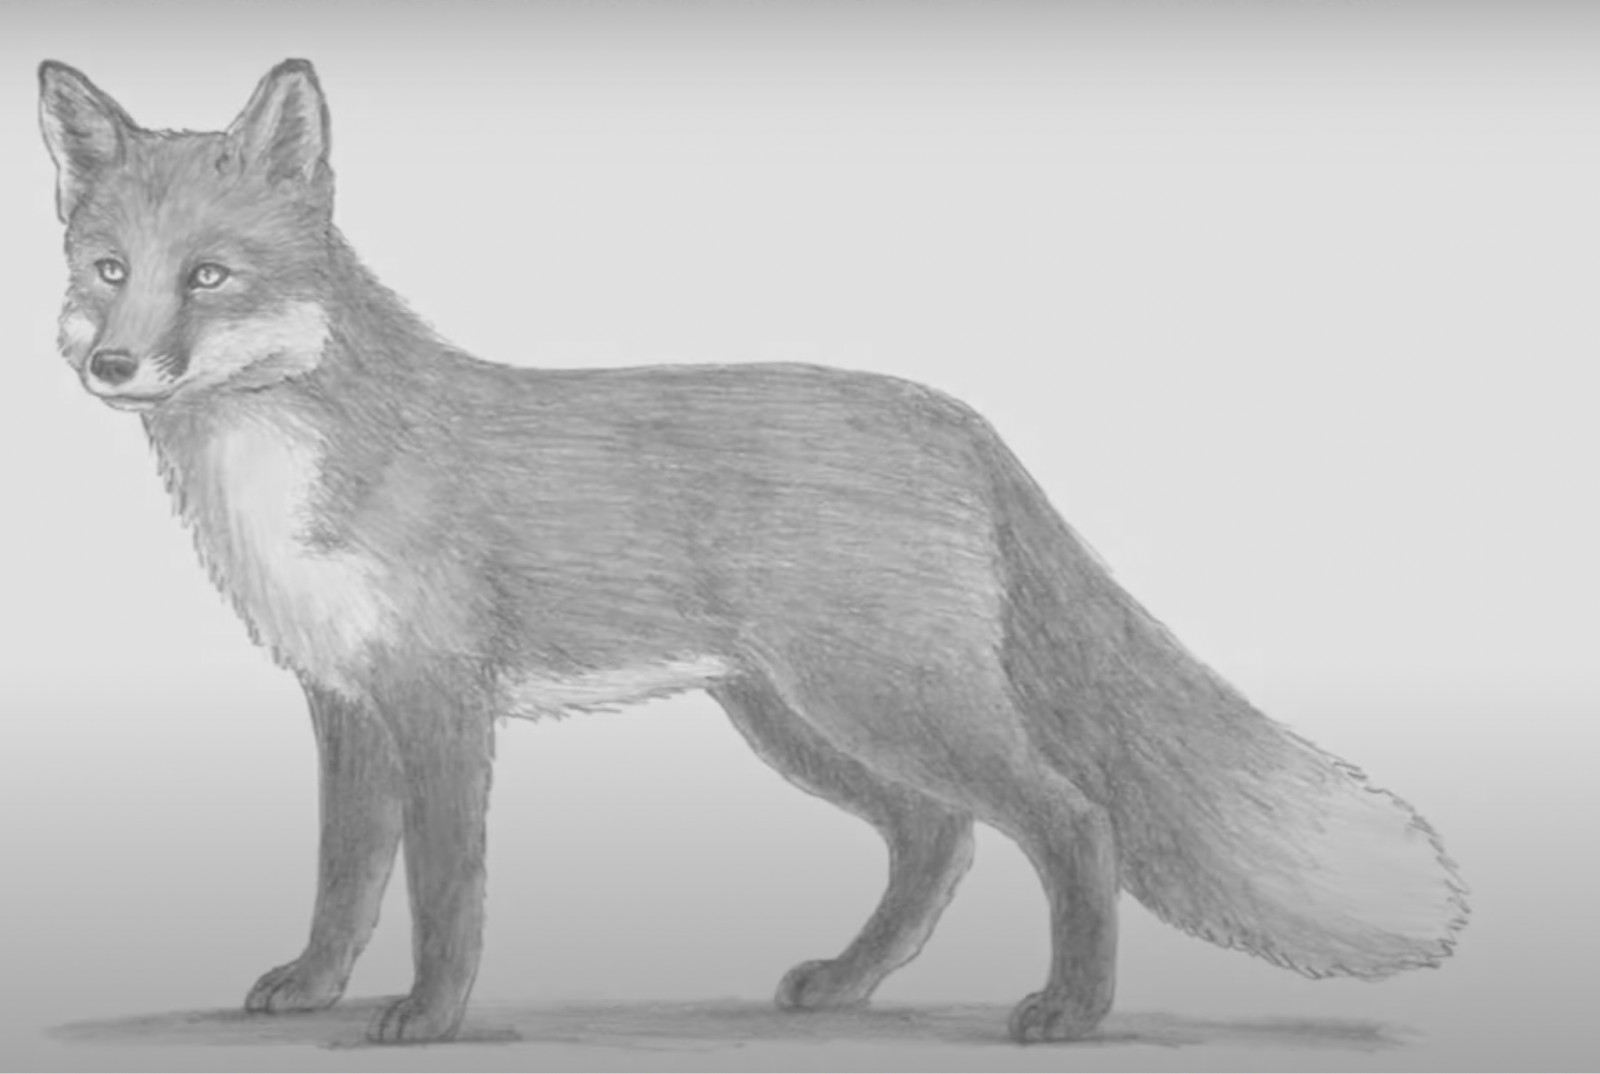 15 Unique Ways to Paint a Fox for Any Levels